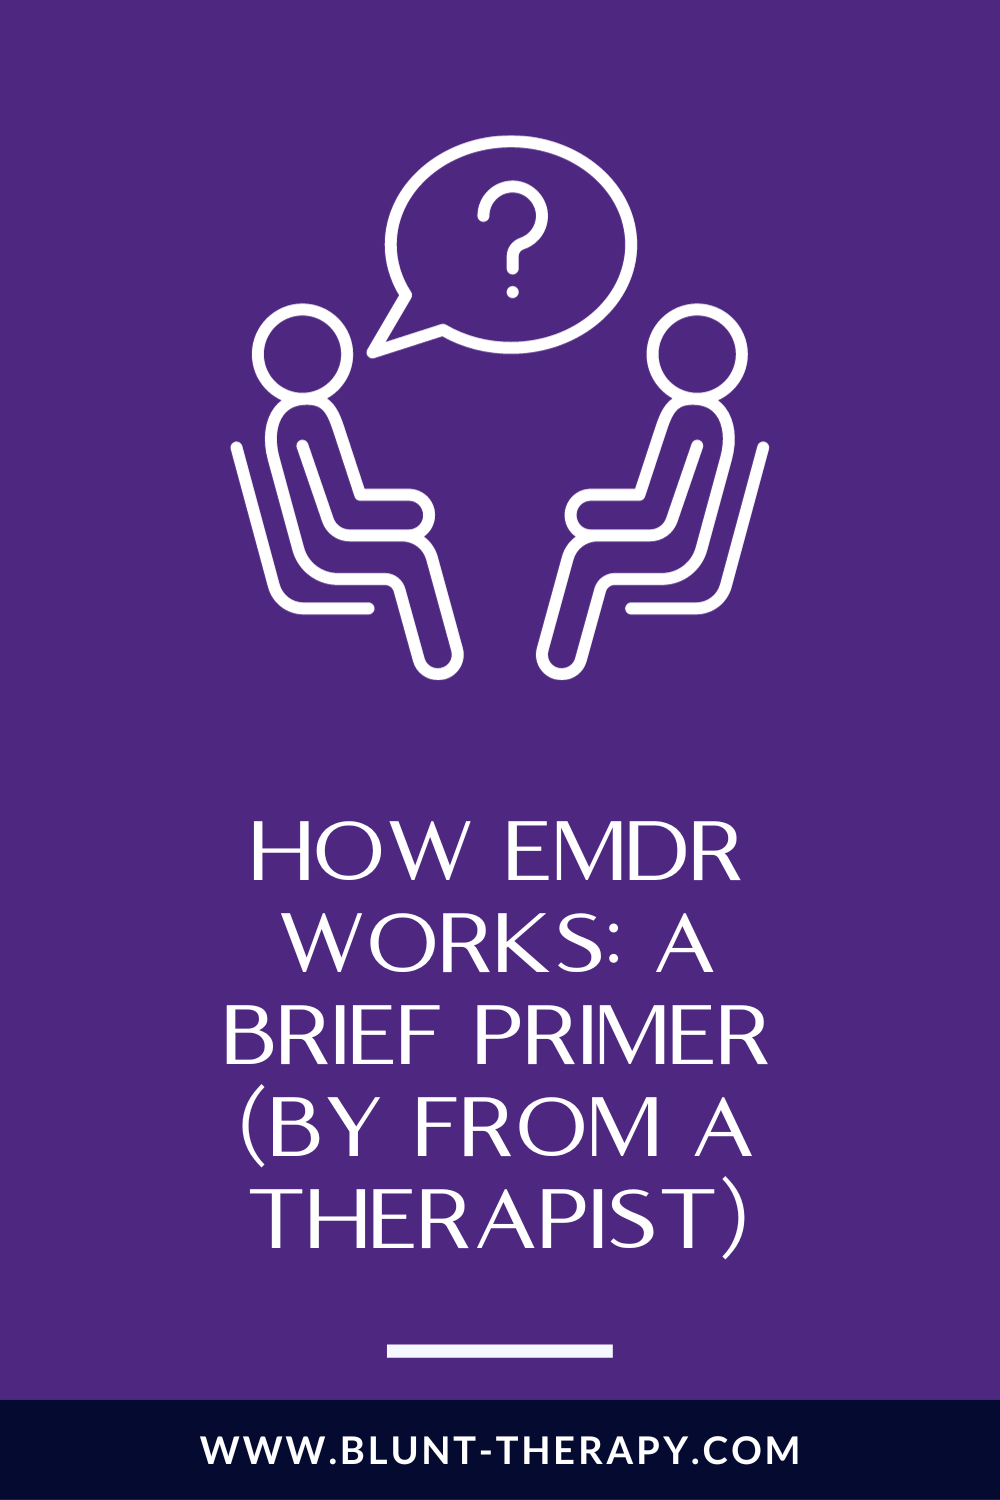 How EMDR Works: A Brief Primer (By From A Therapist)